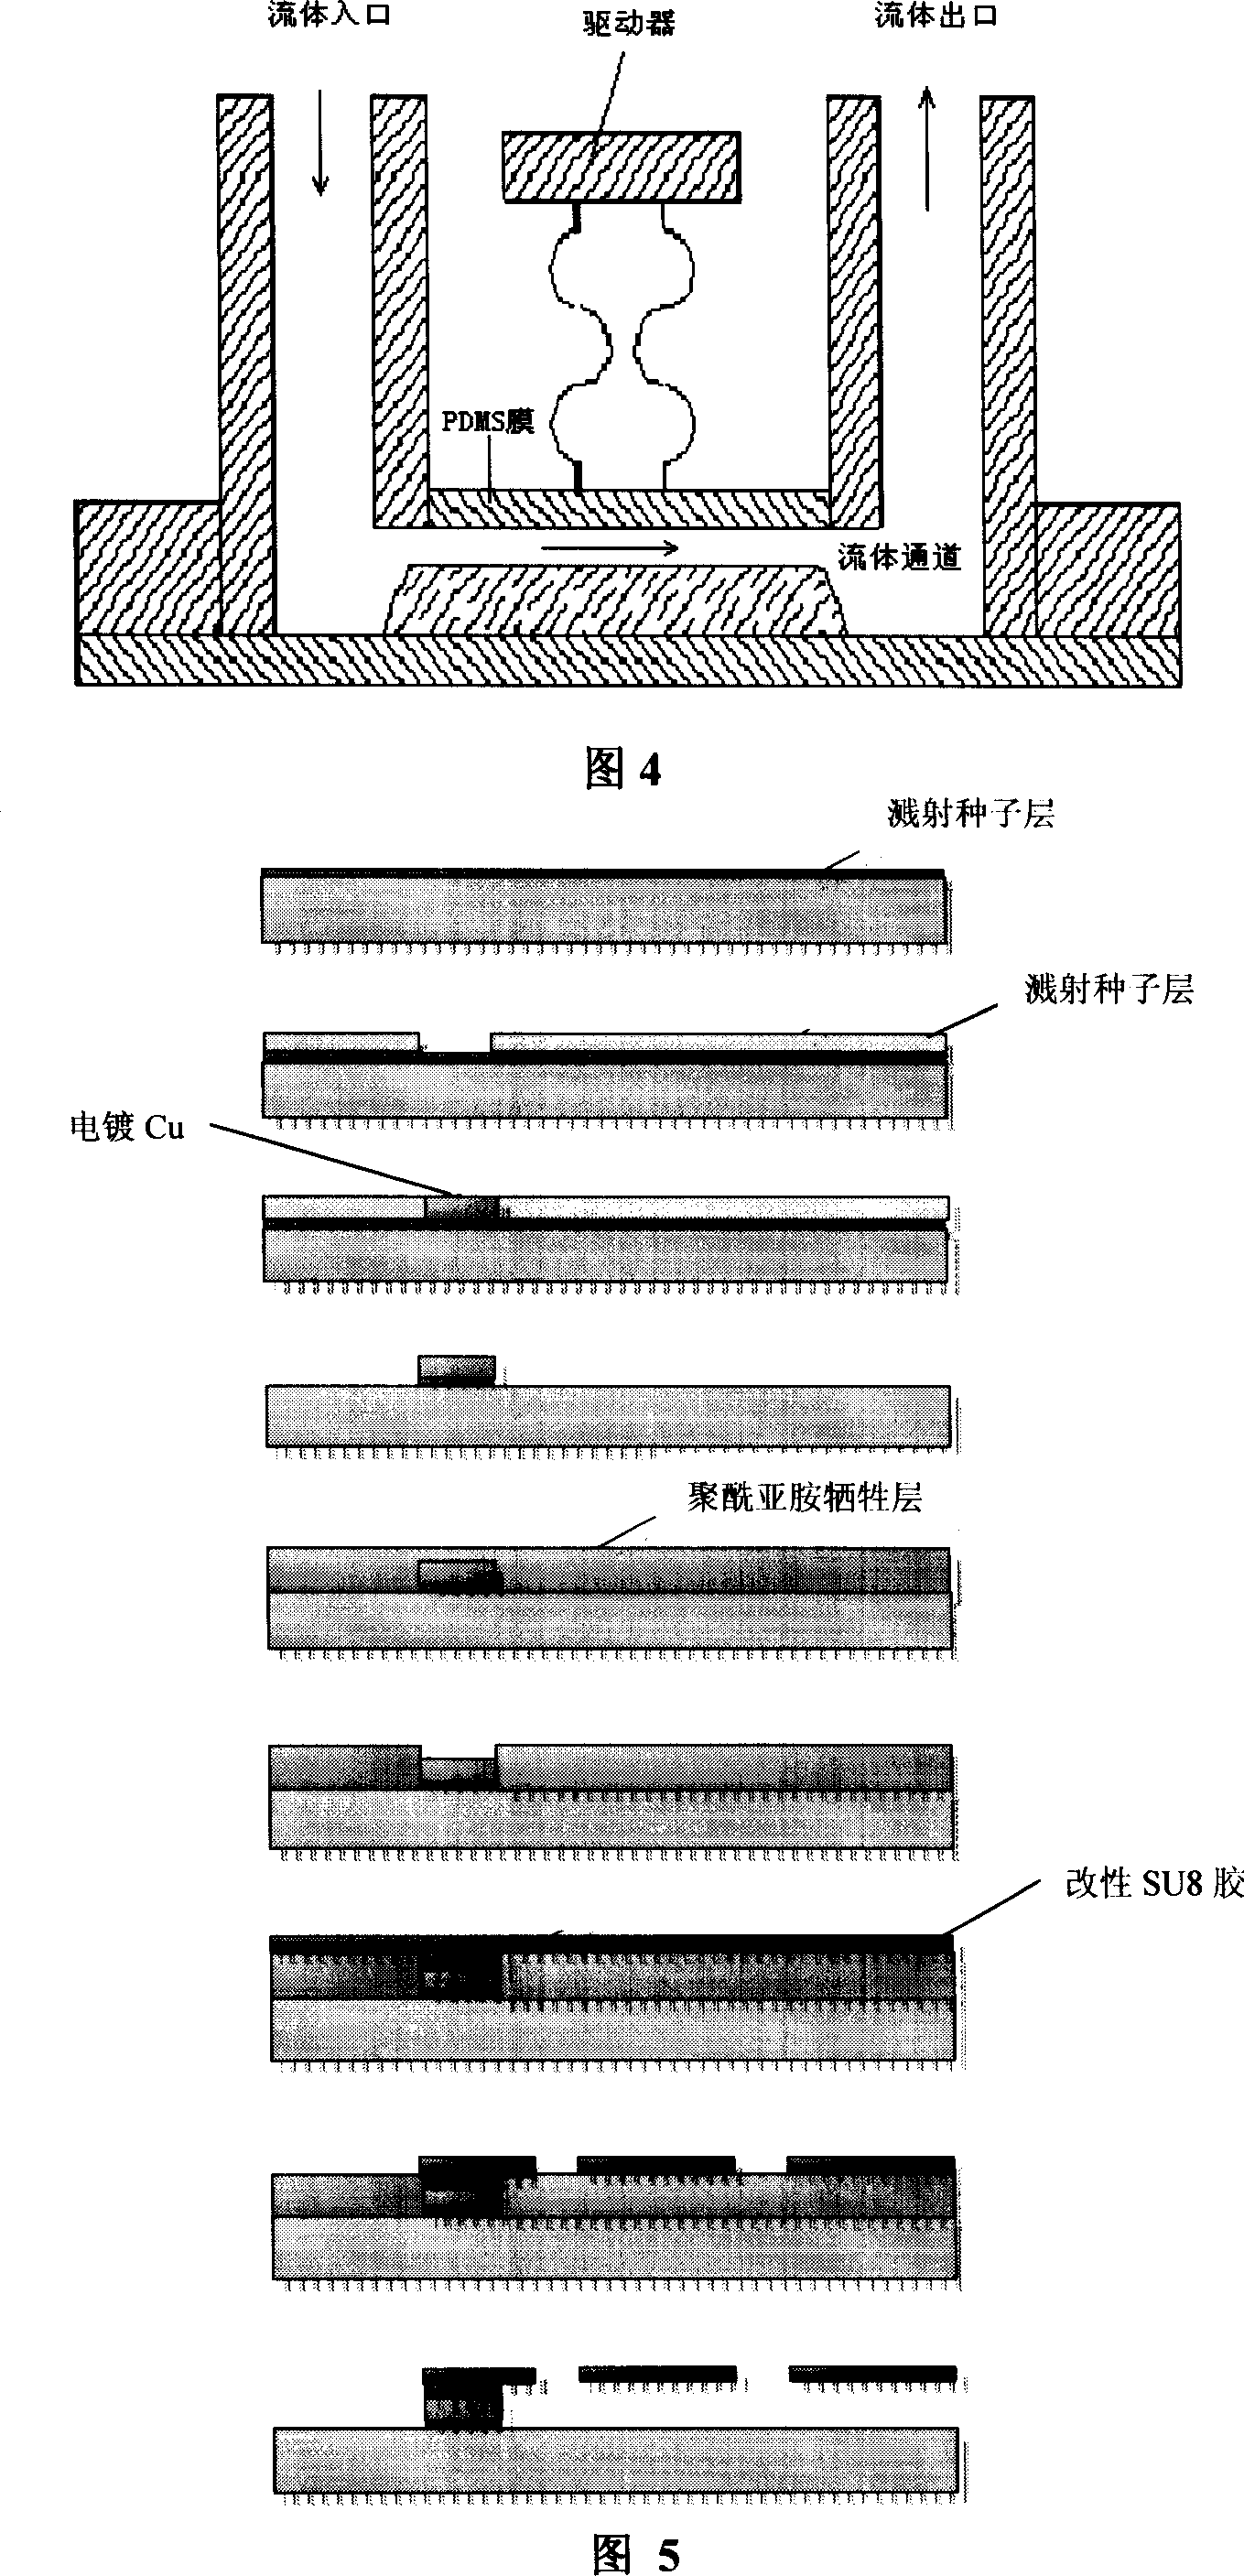 Modified SU8 electric heating micro-performer with multi-arc structure for straight line propulsion